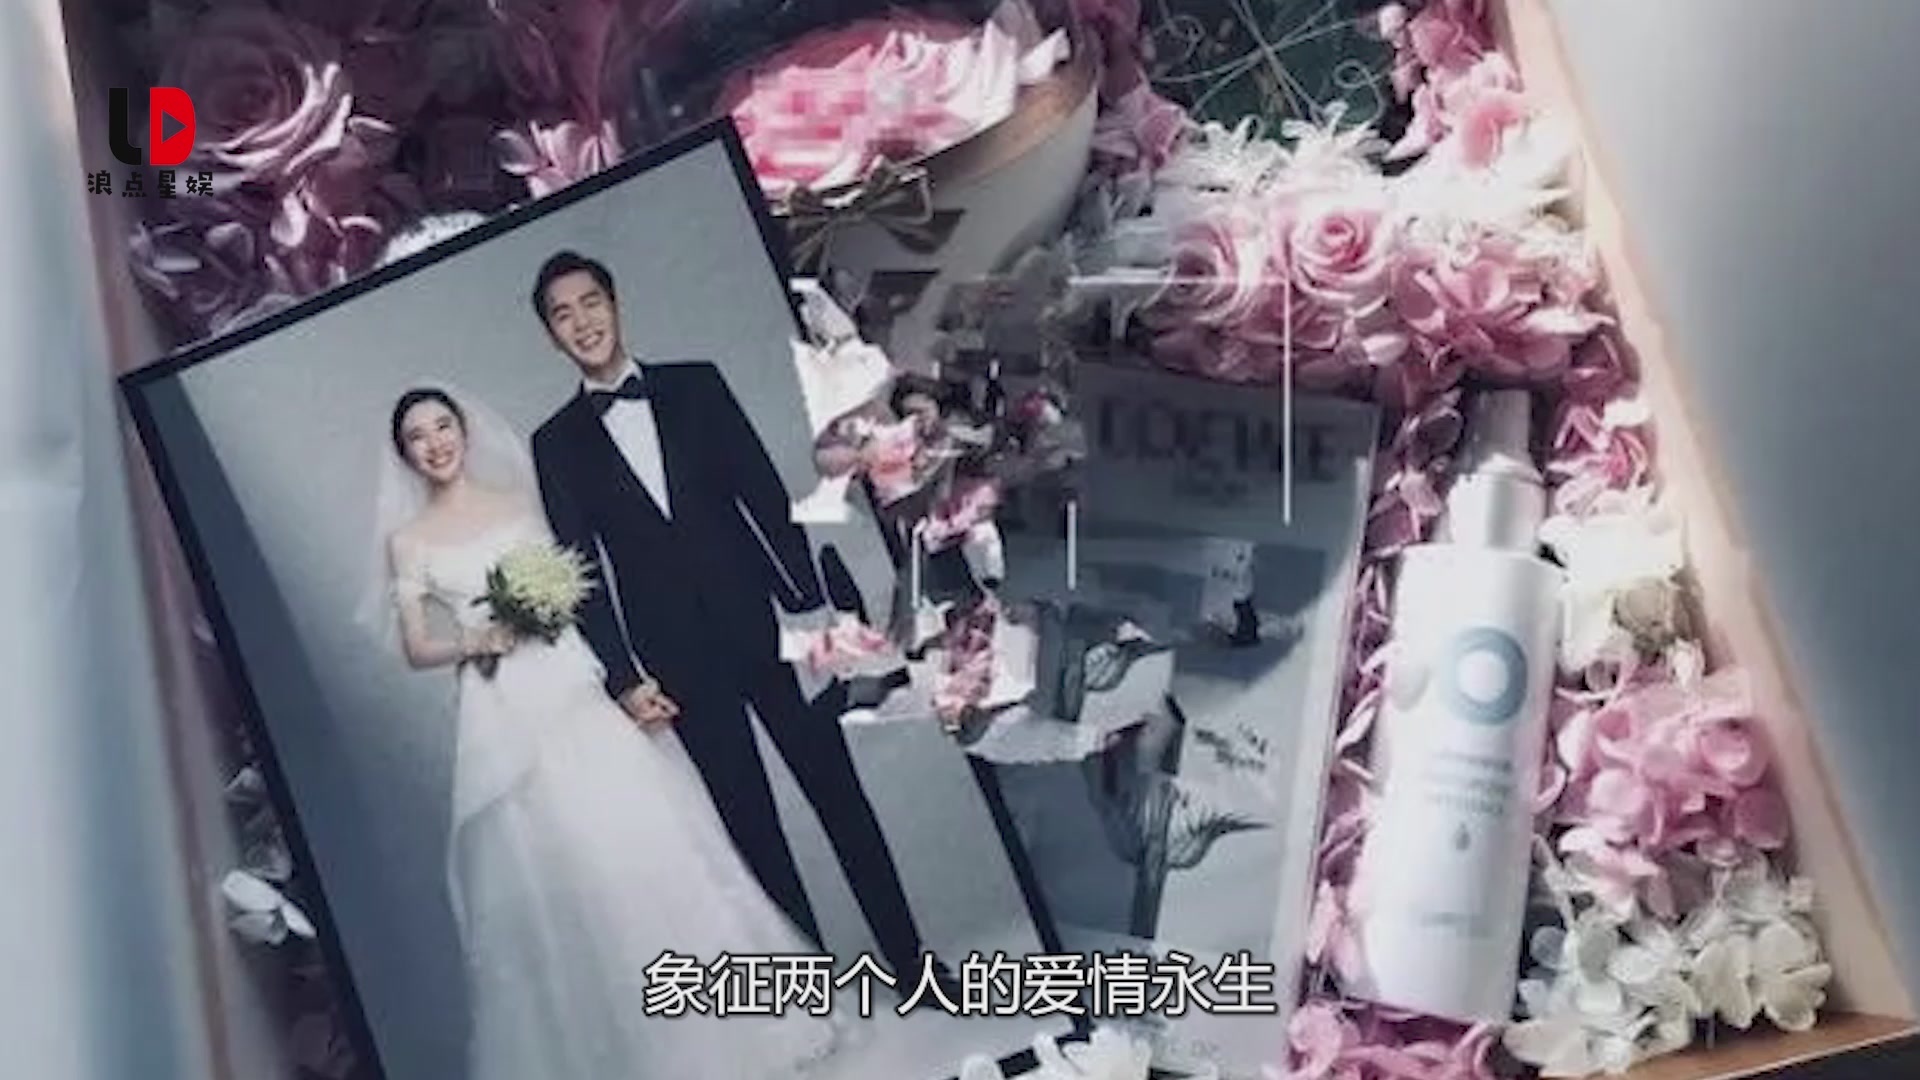 Zhang Ruoyun and Tang Yixin's wedding companion ceremony was exposed, and the wedding photos first flowed out, full of romance!